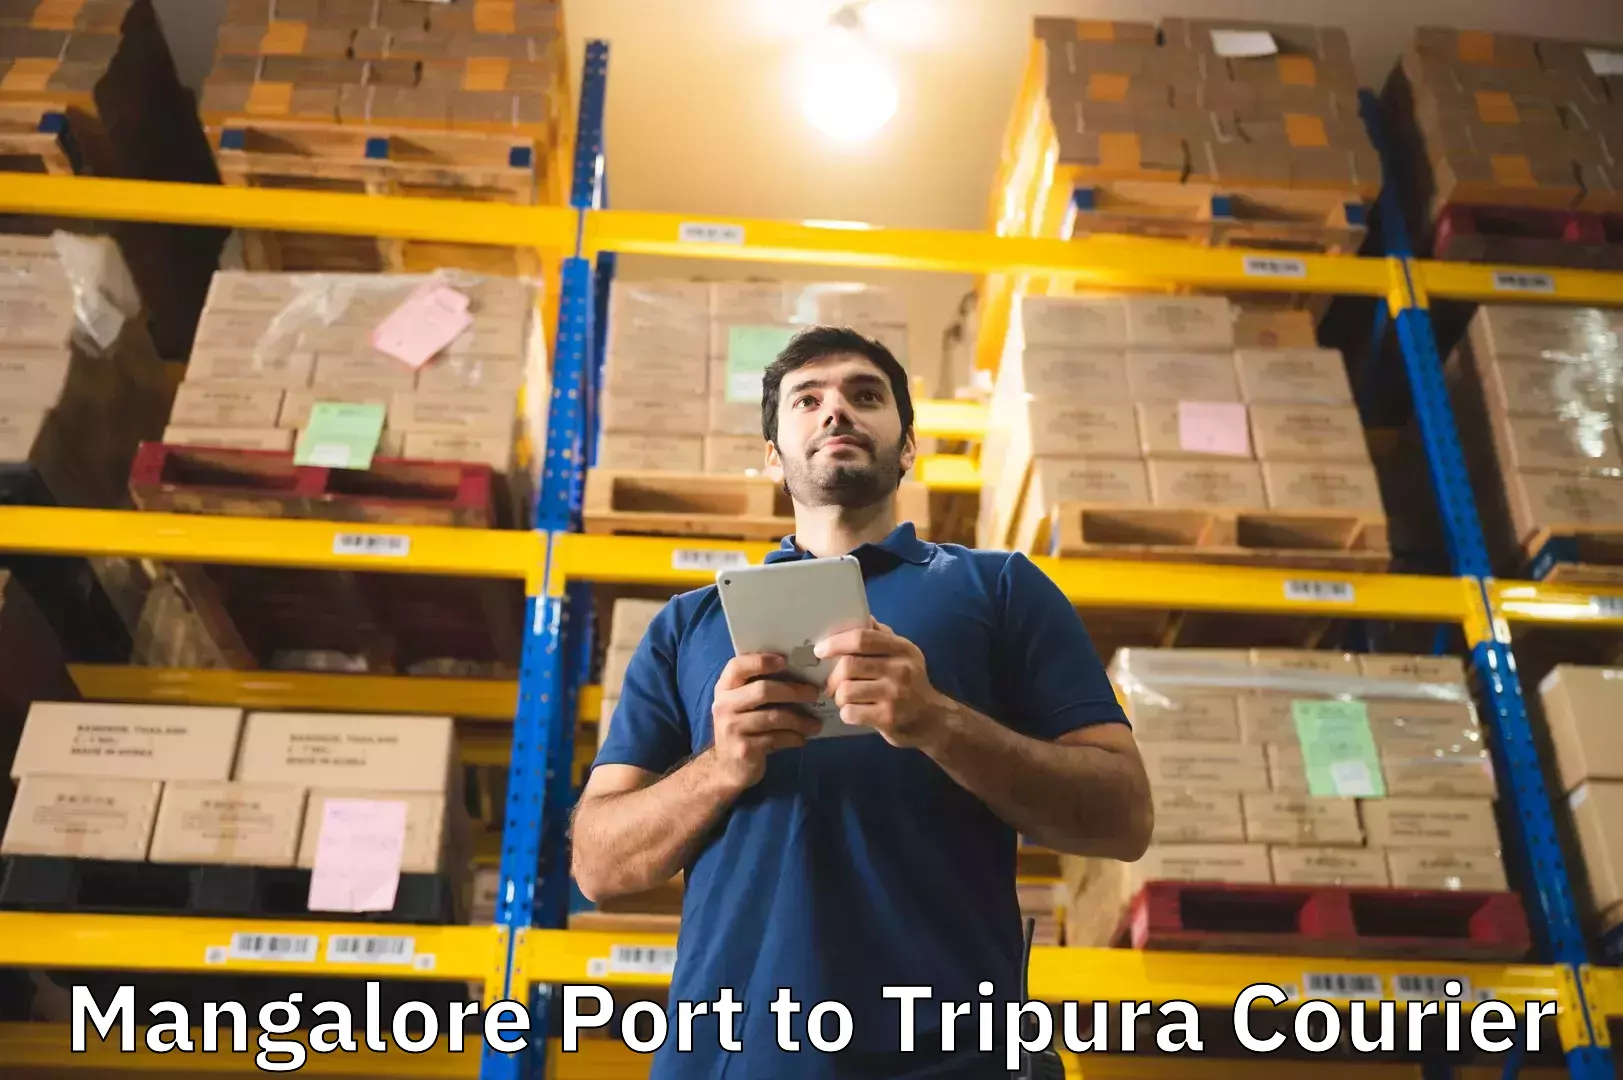 Luggage delivery app Mangalore Port to Udaipur Tripura